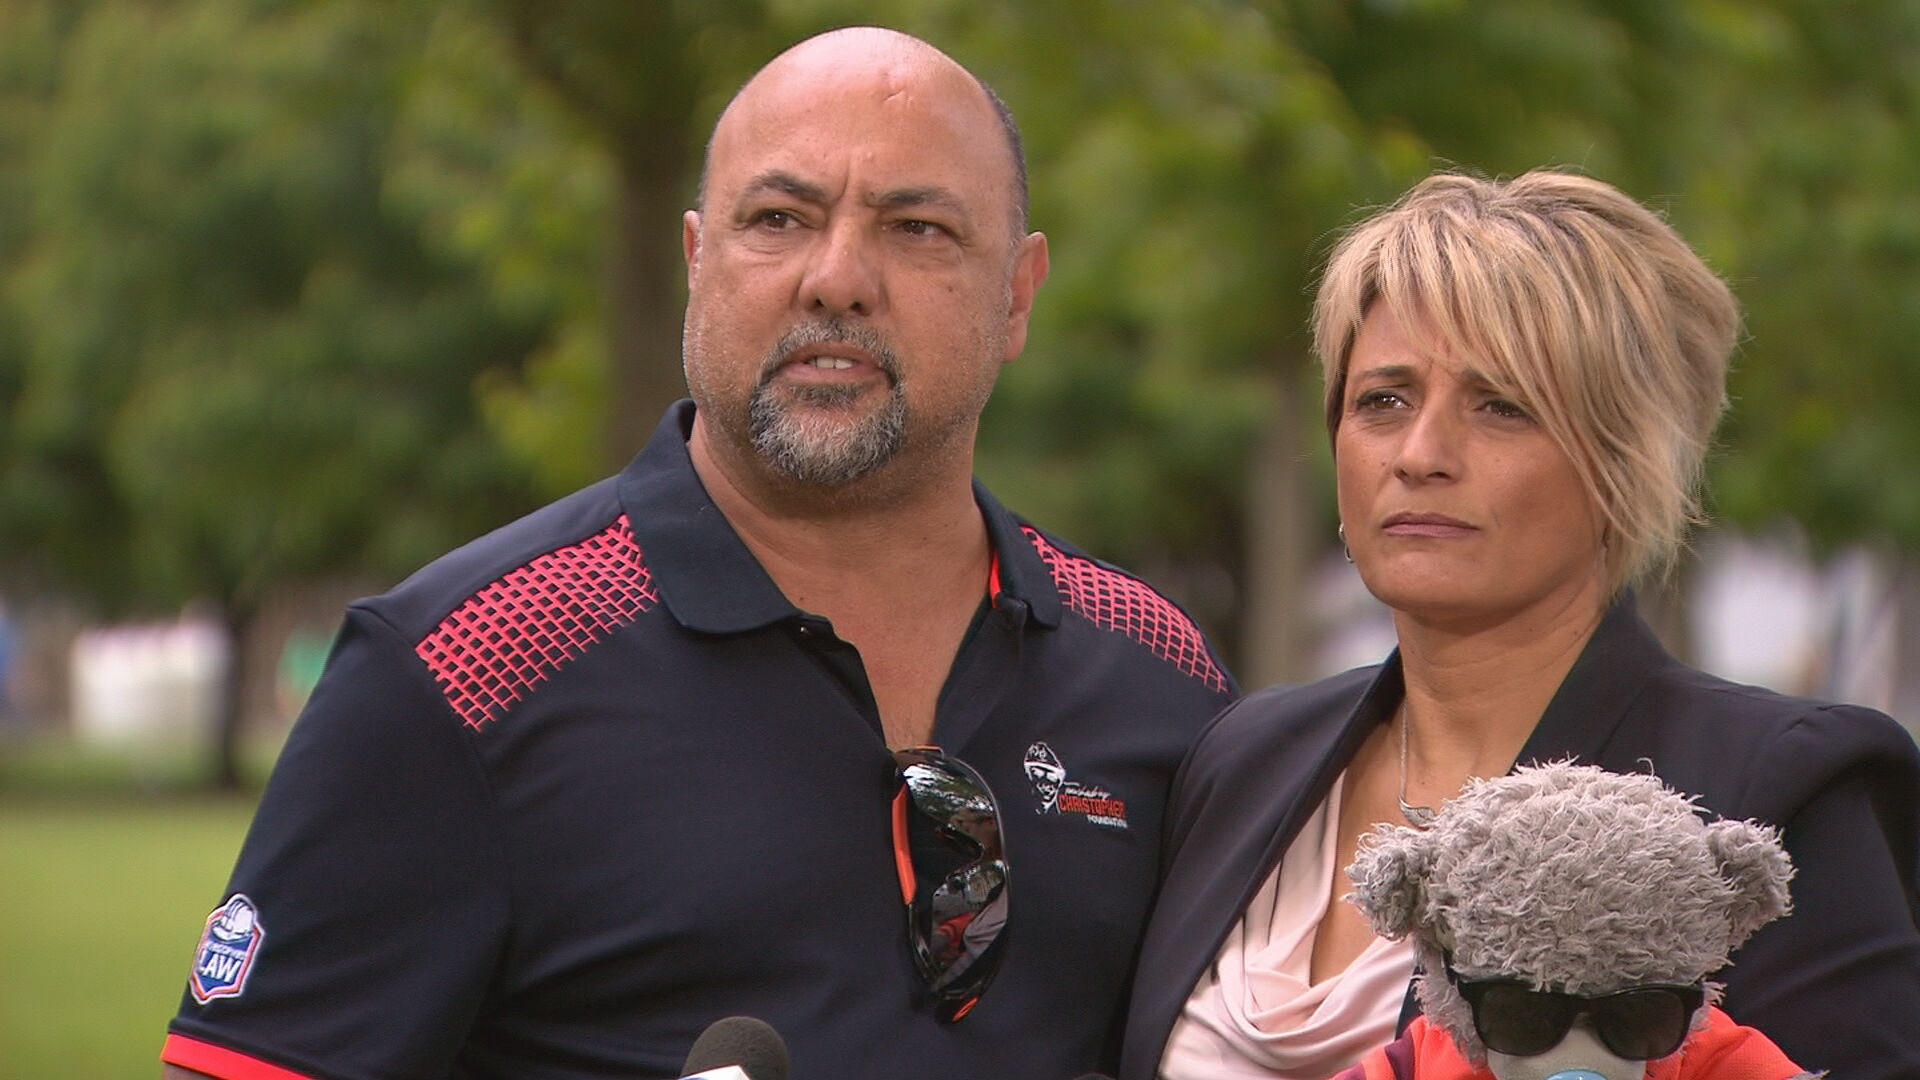 The family of young tradie Christopher Cassaniti, who was killed in a Sydney building site collapse. has called a $2 million fine for the scaffolding company involved "laughable".